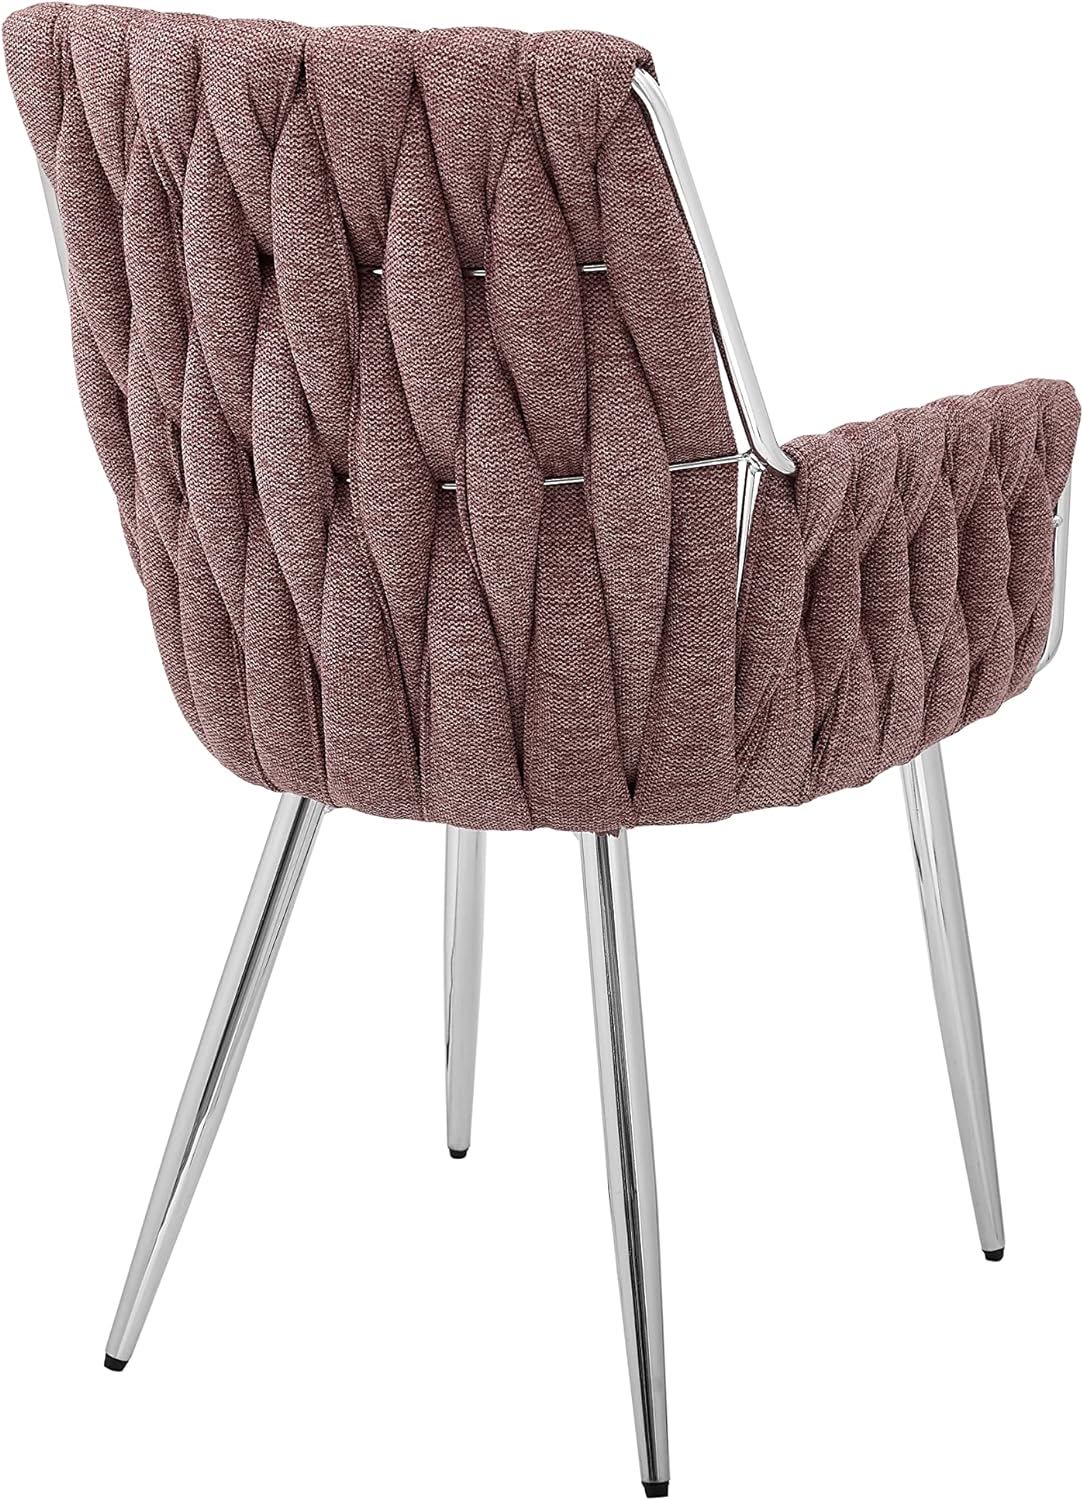 Art Modern Dining Chairs, Hand Weaving Accent Chairs